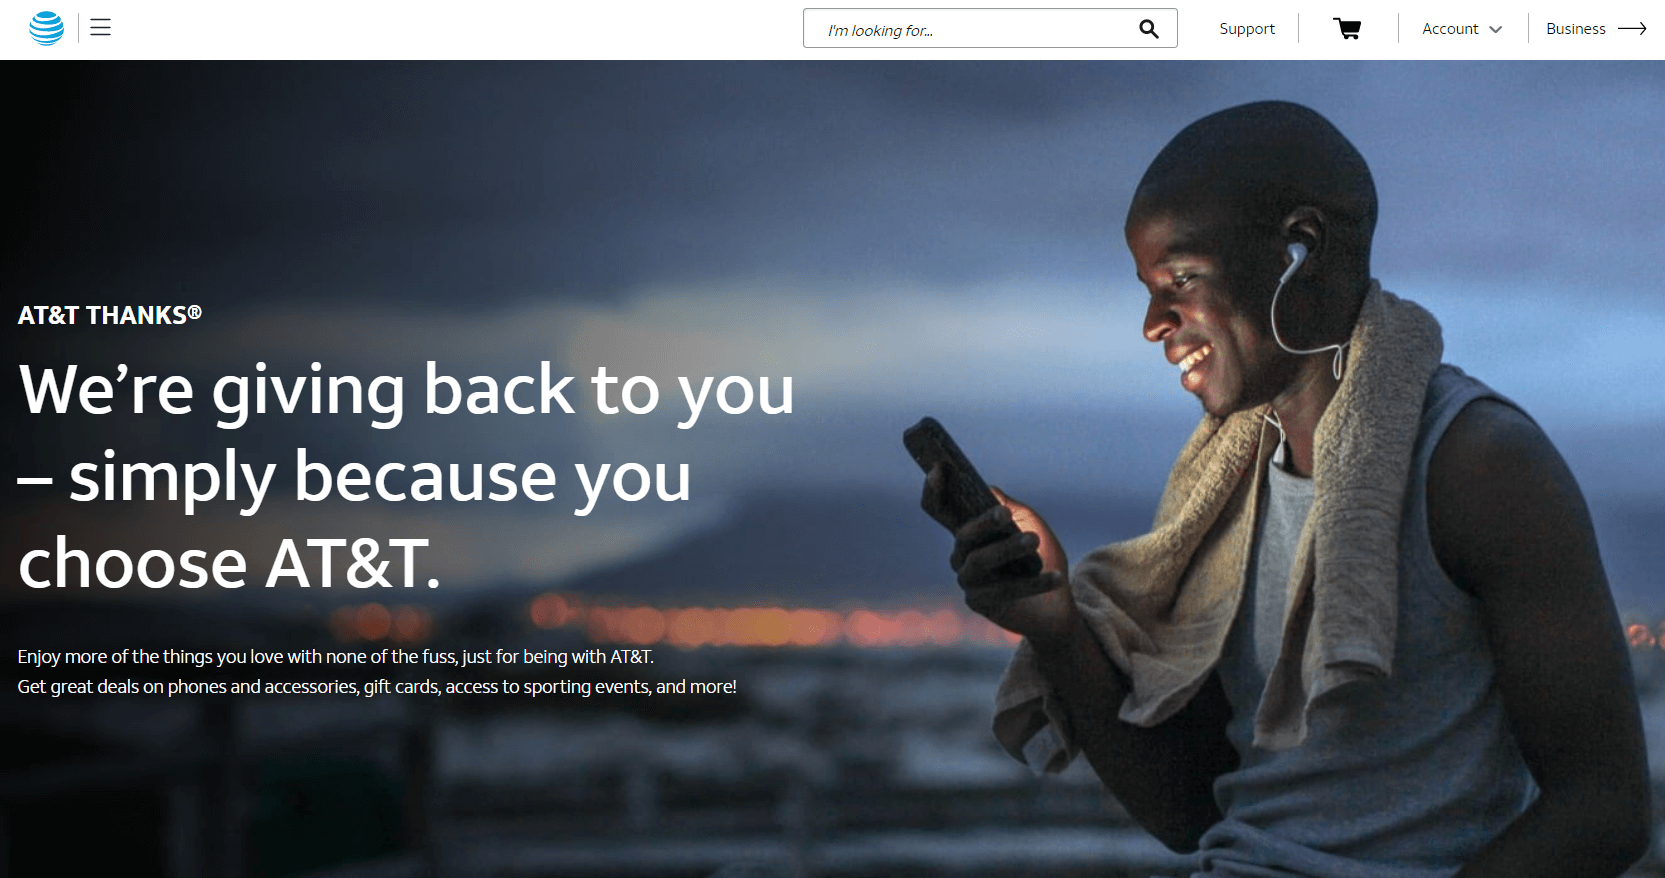 Main page and message of At&T Thanks loyalty program.